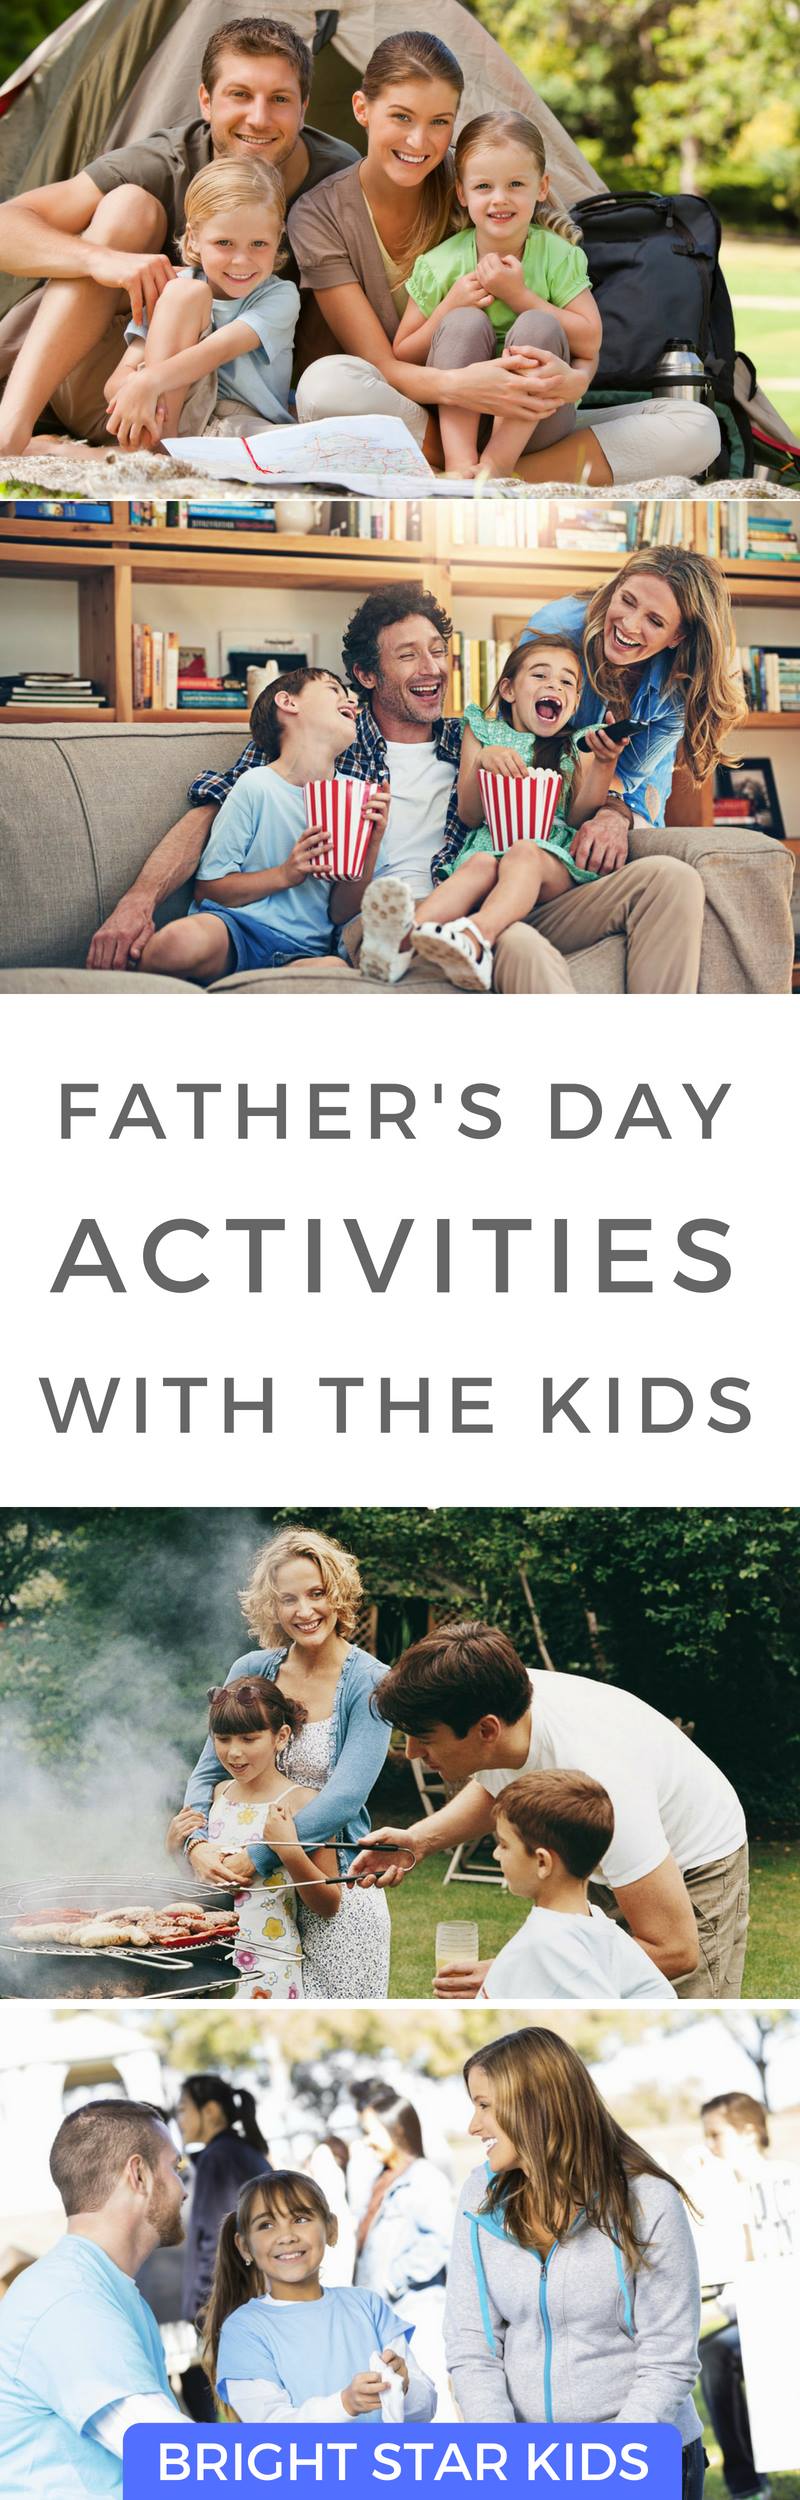 father's day activities